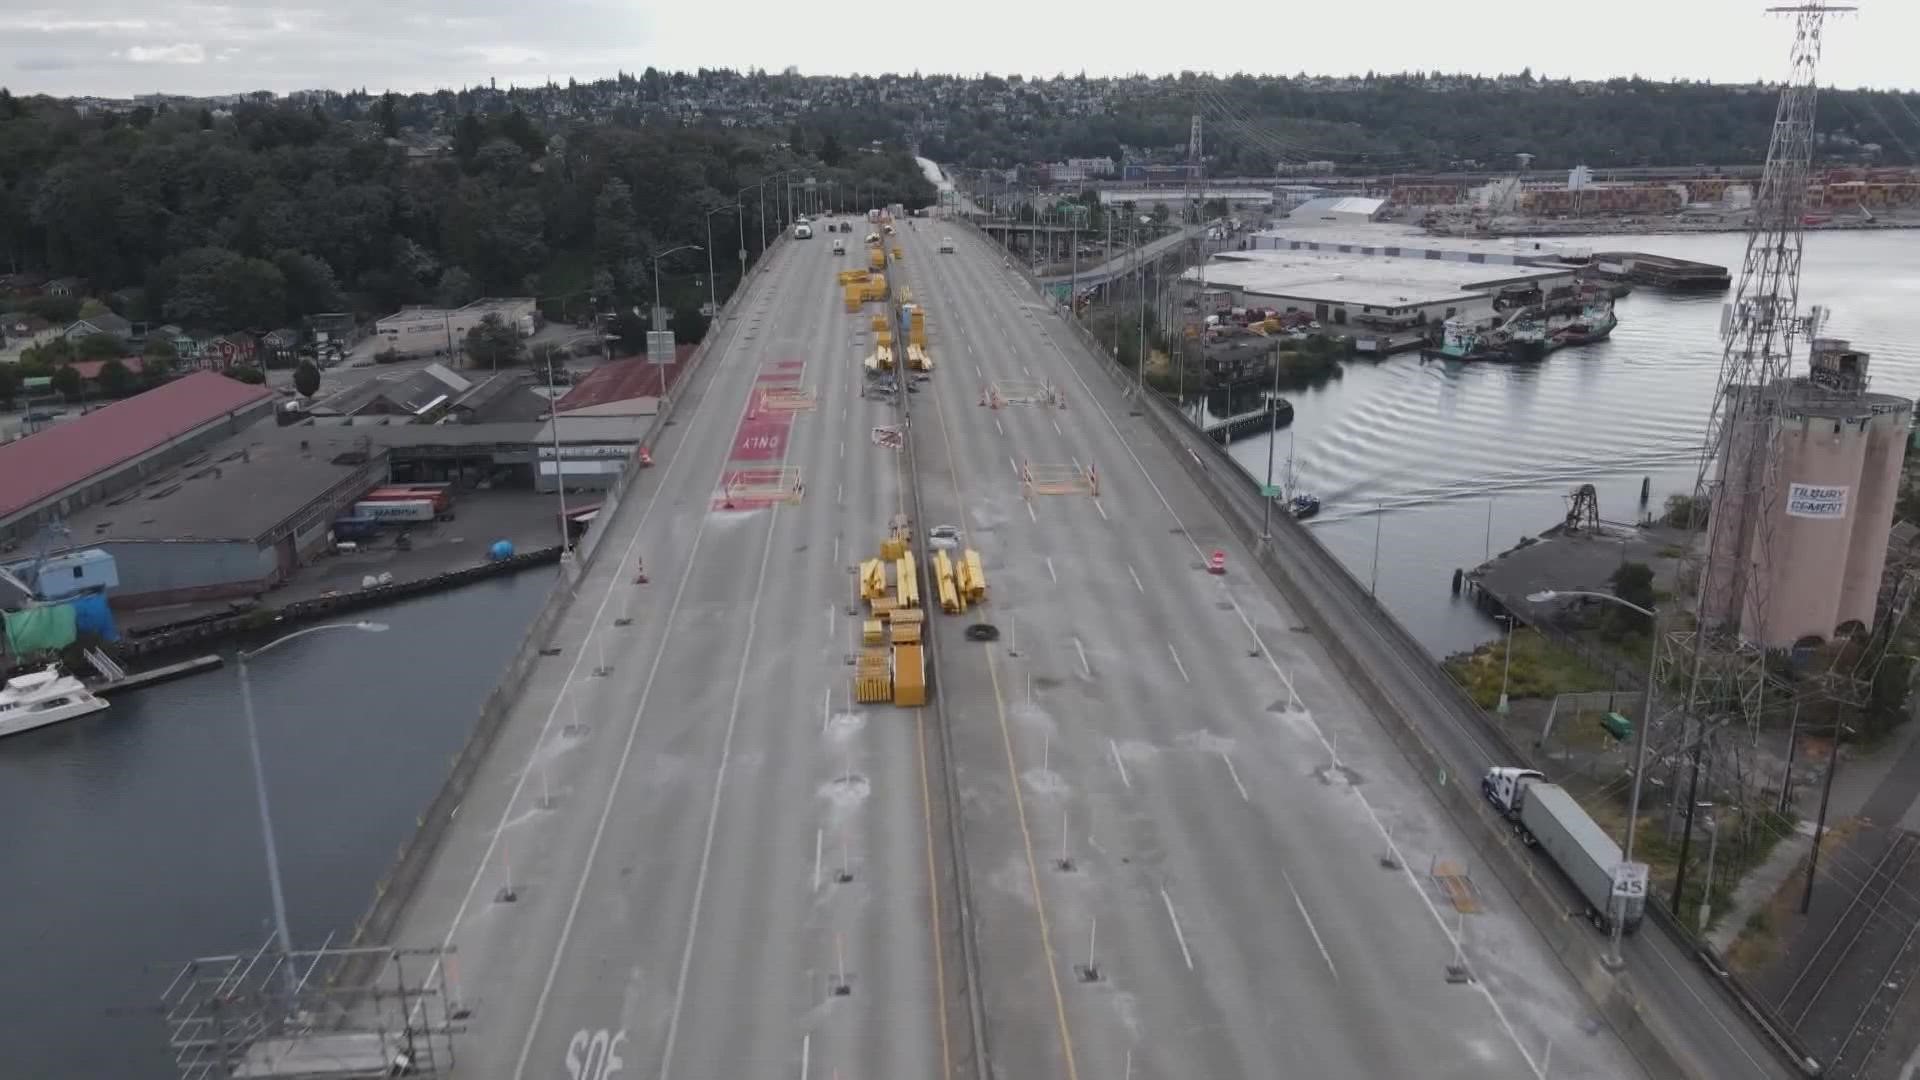 Before the bridge reopens on Sept. 18, SDOT will perform safety tests to ensure the bridge is structurally sound.